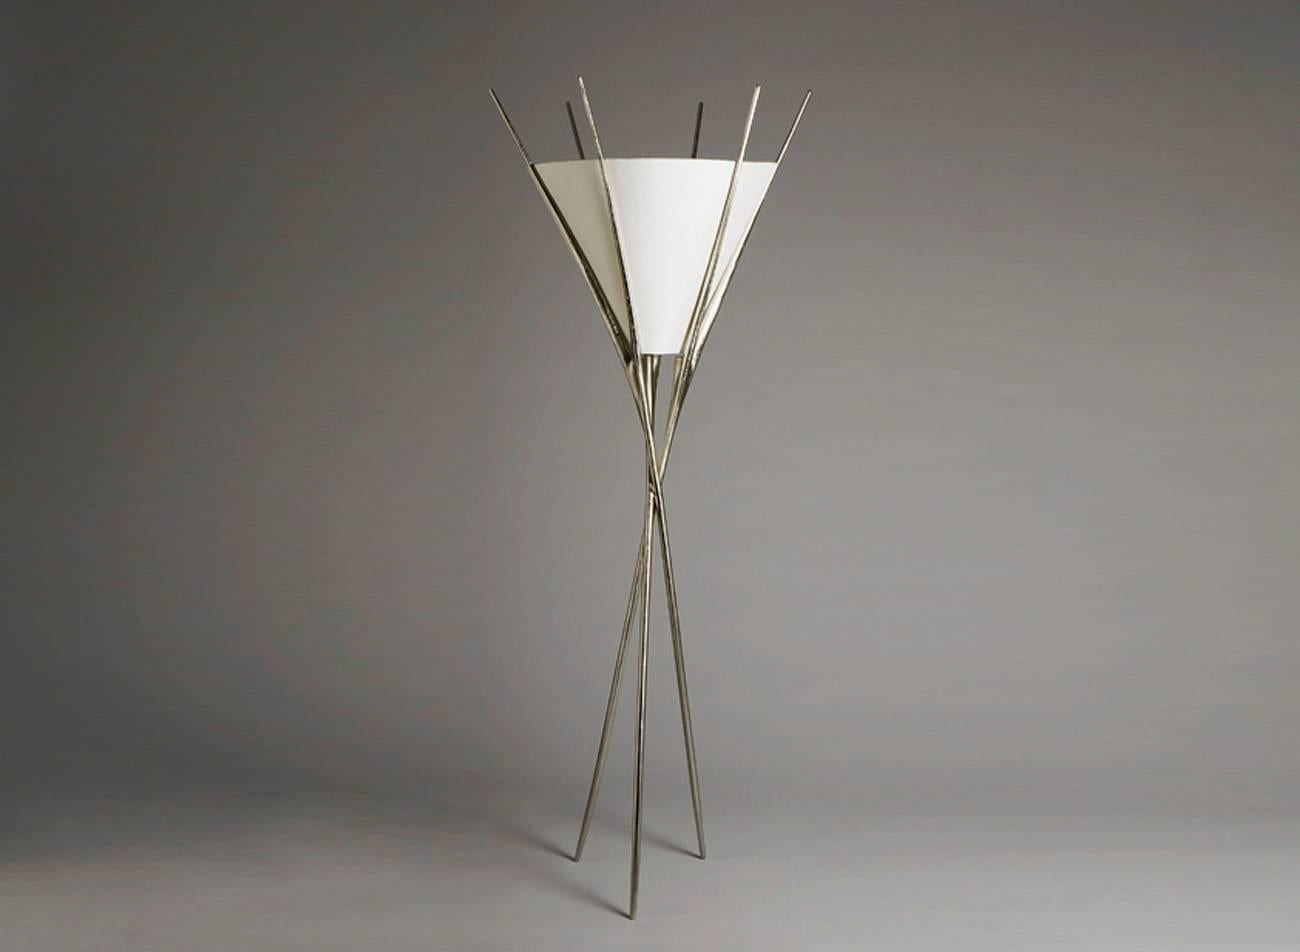 Impala, floor lamp
Design by Jean-Manuel Freitas
Made of bronze
Made in France by Charles Paris.
    